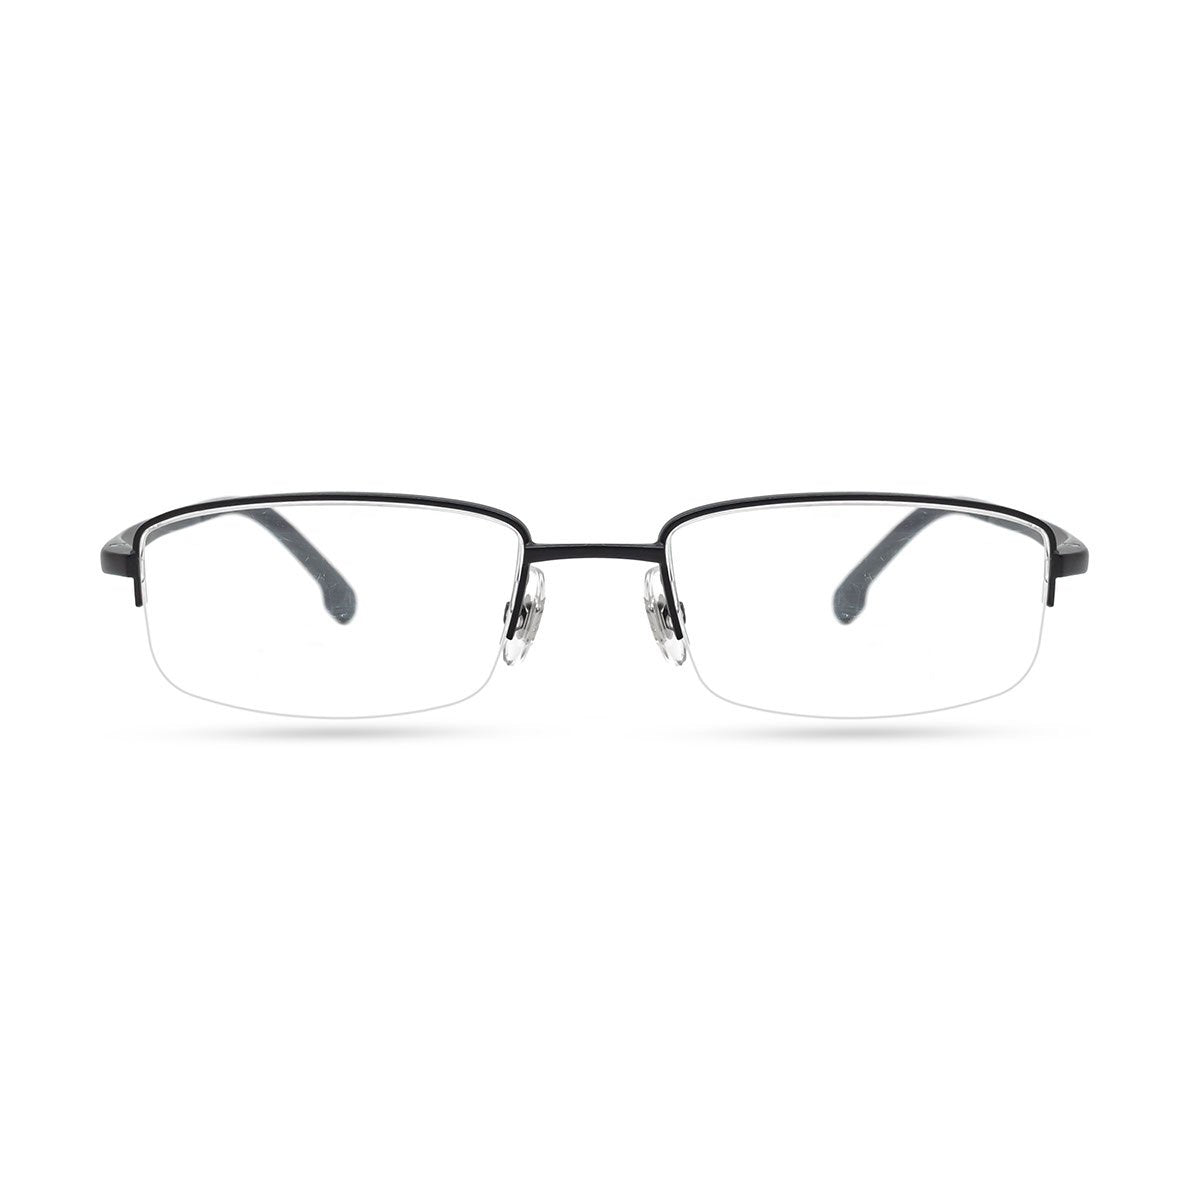 CARRERA 8860 3 spectacle-frame